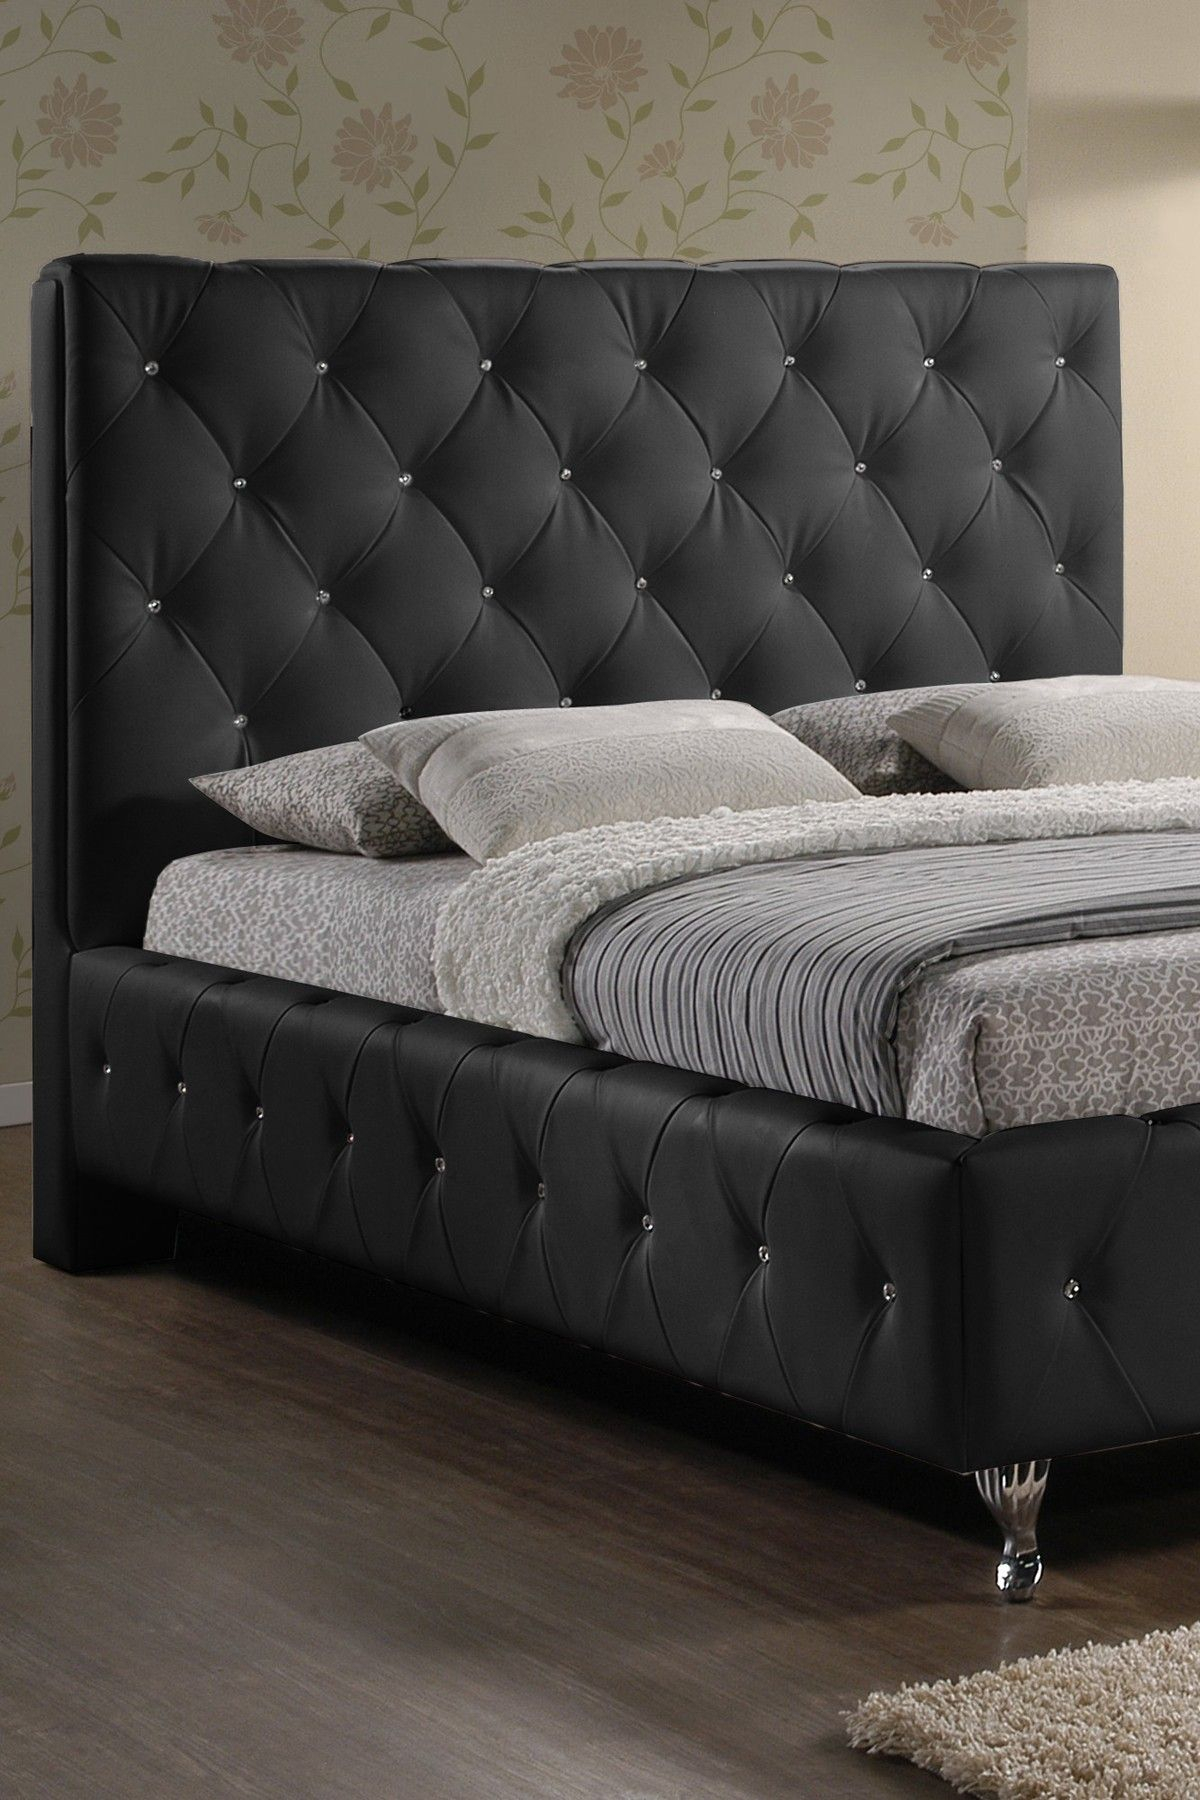 Stella Crystal Tufted Modern Bed With Upholstered Headboard Black pertaining to dimensions 1200 X 1800